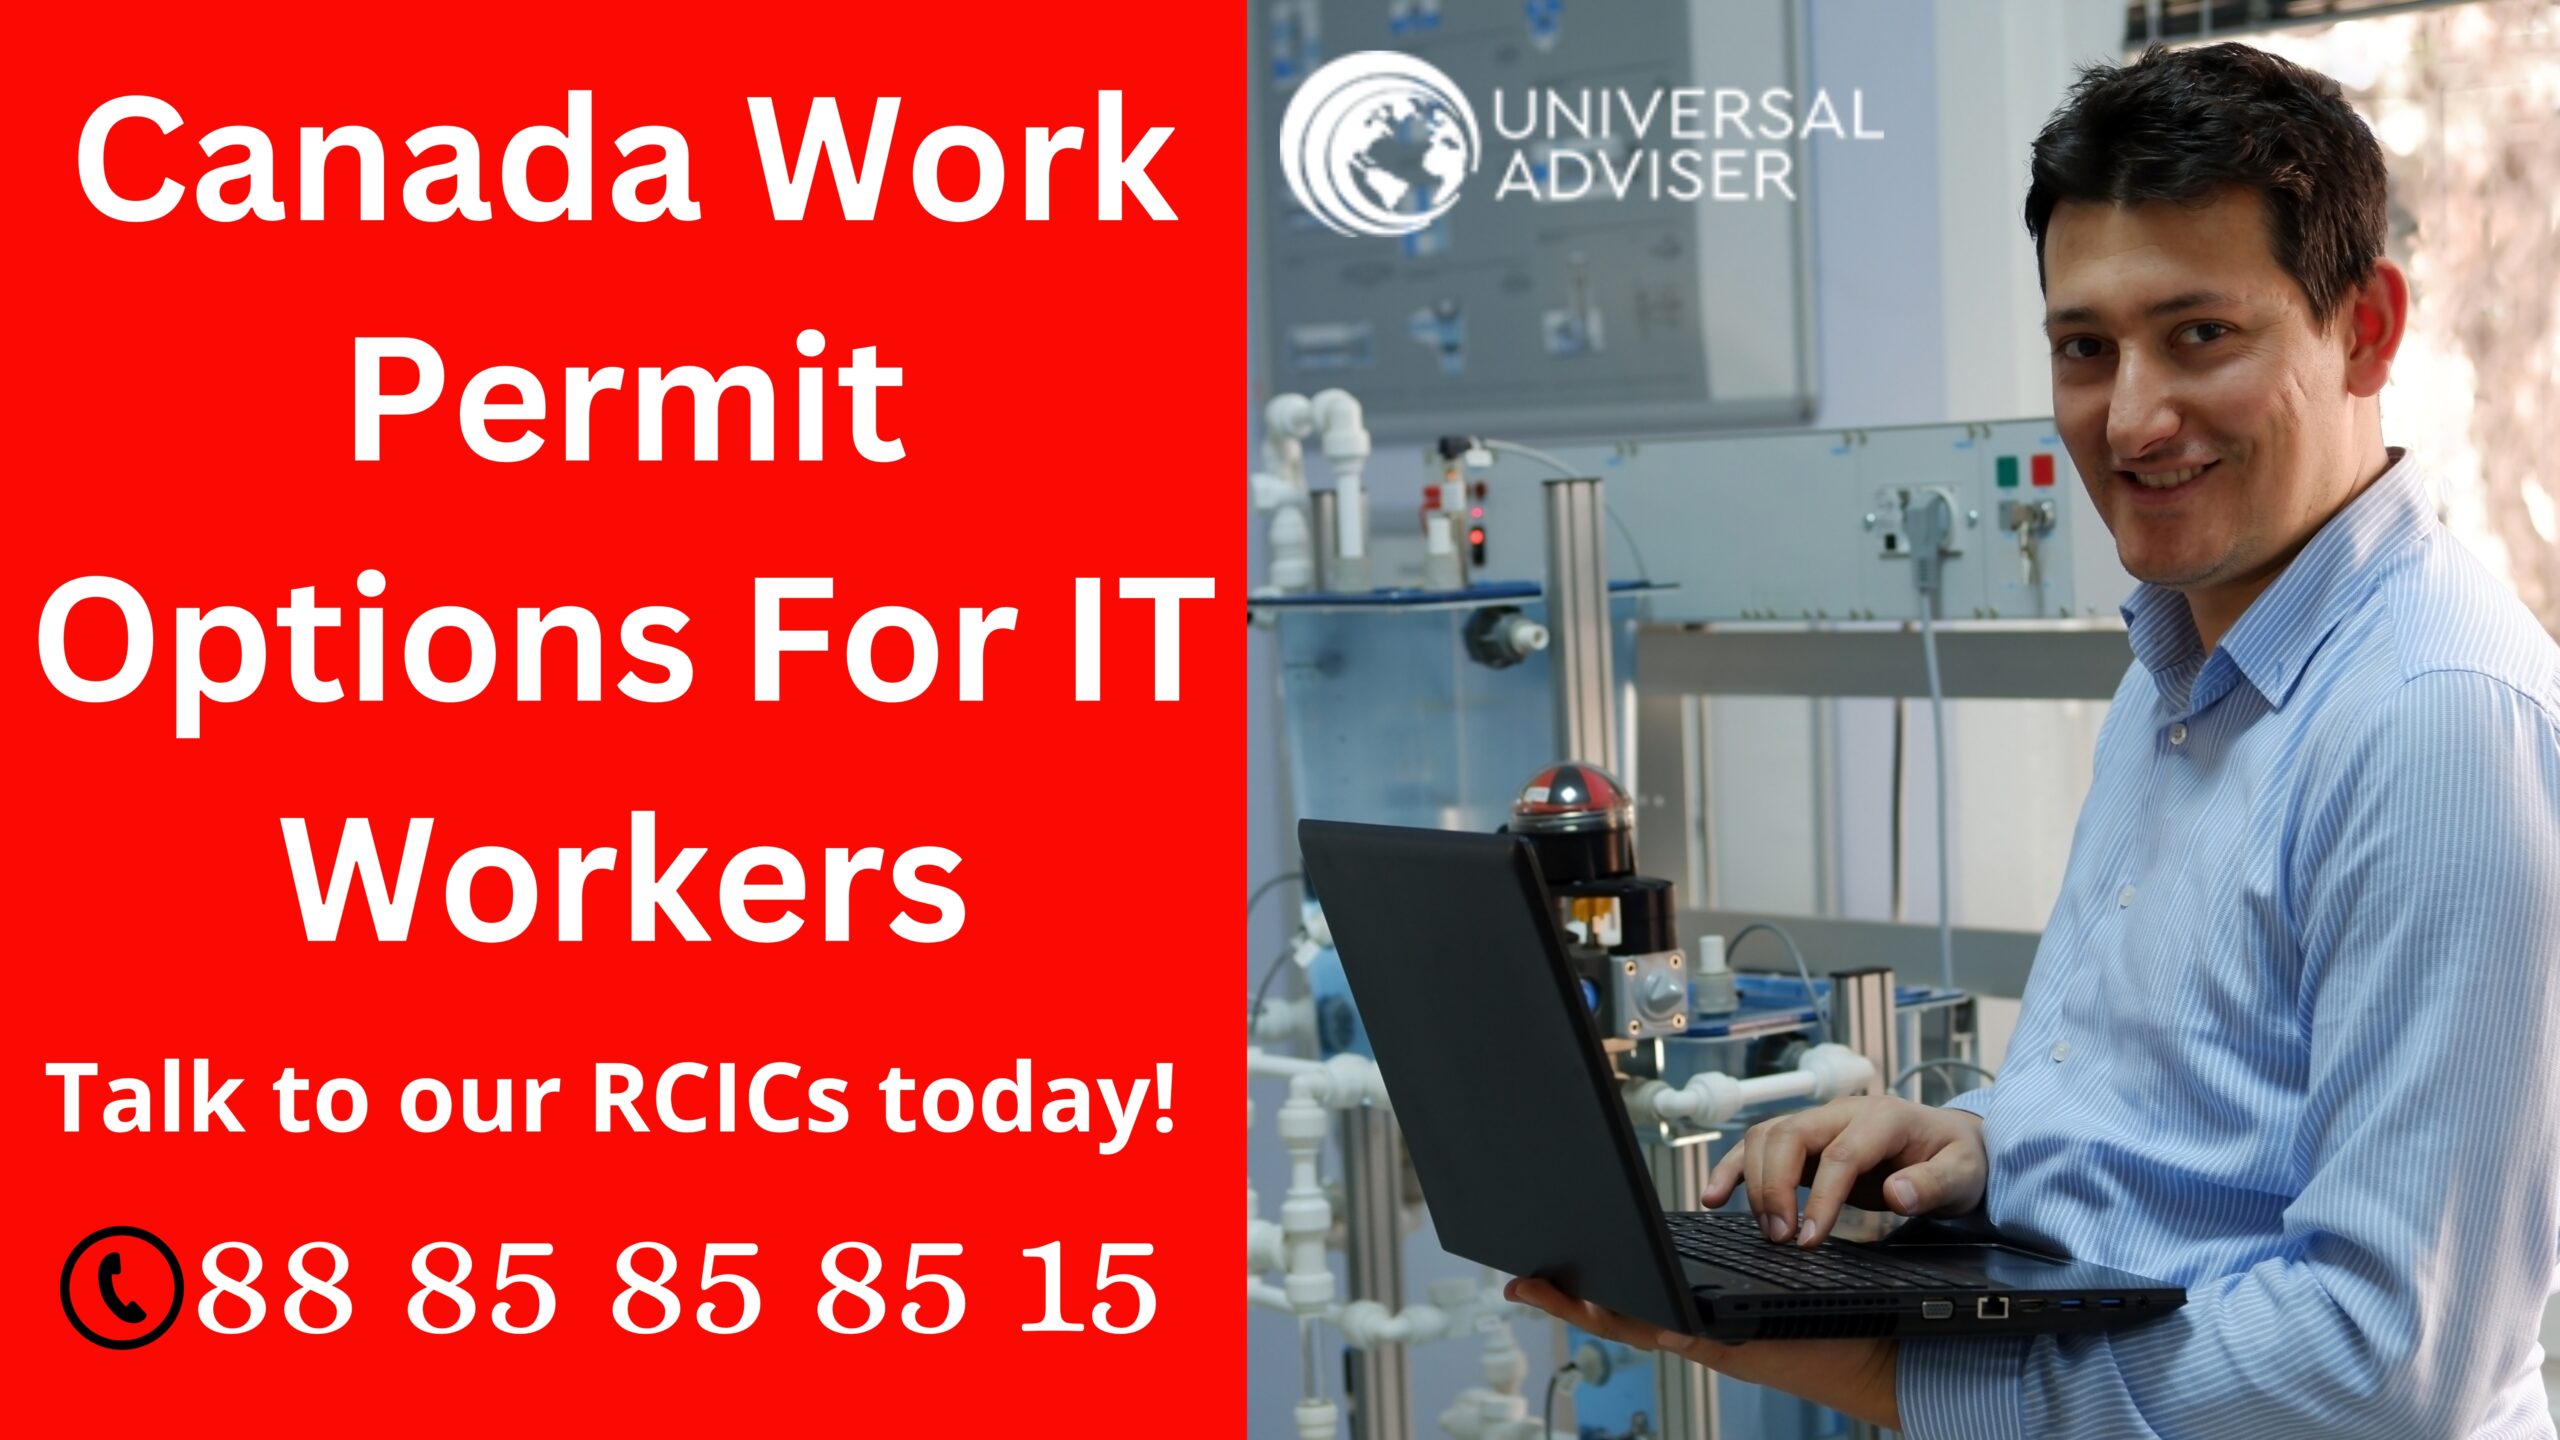 Canada Work Permit Options For IT Workers